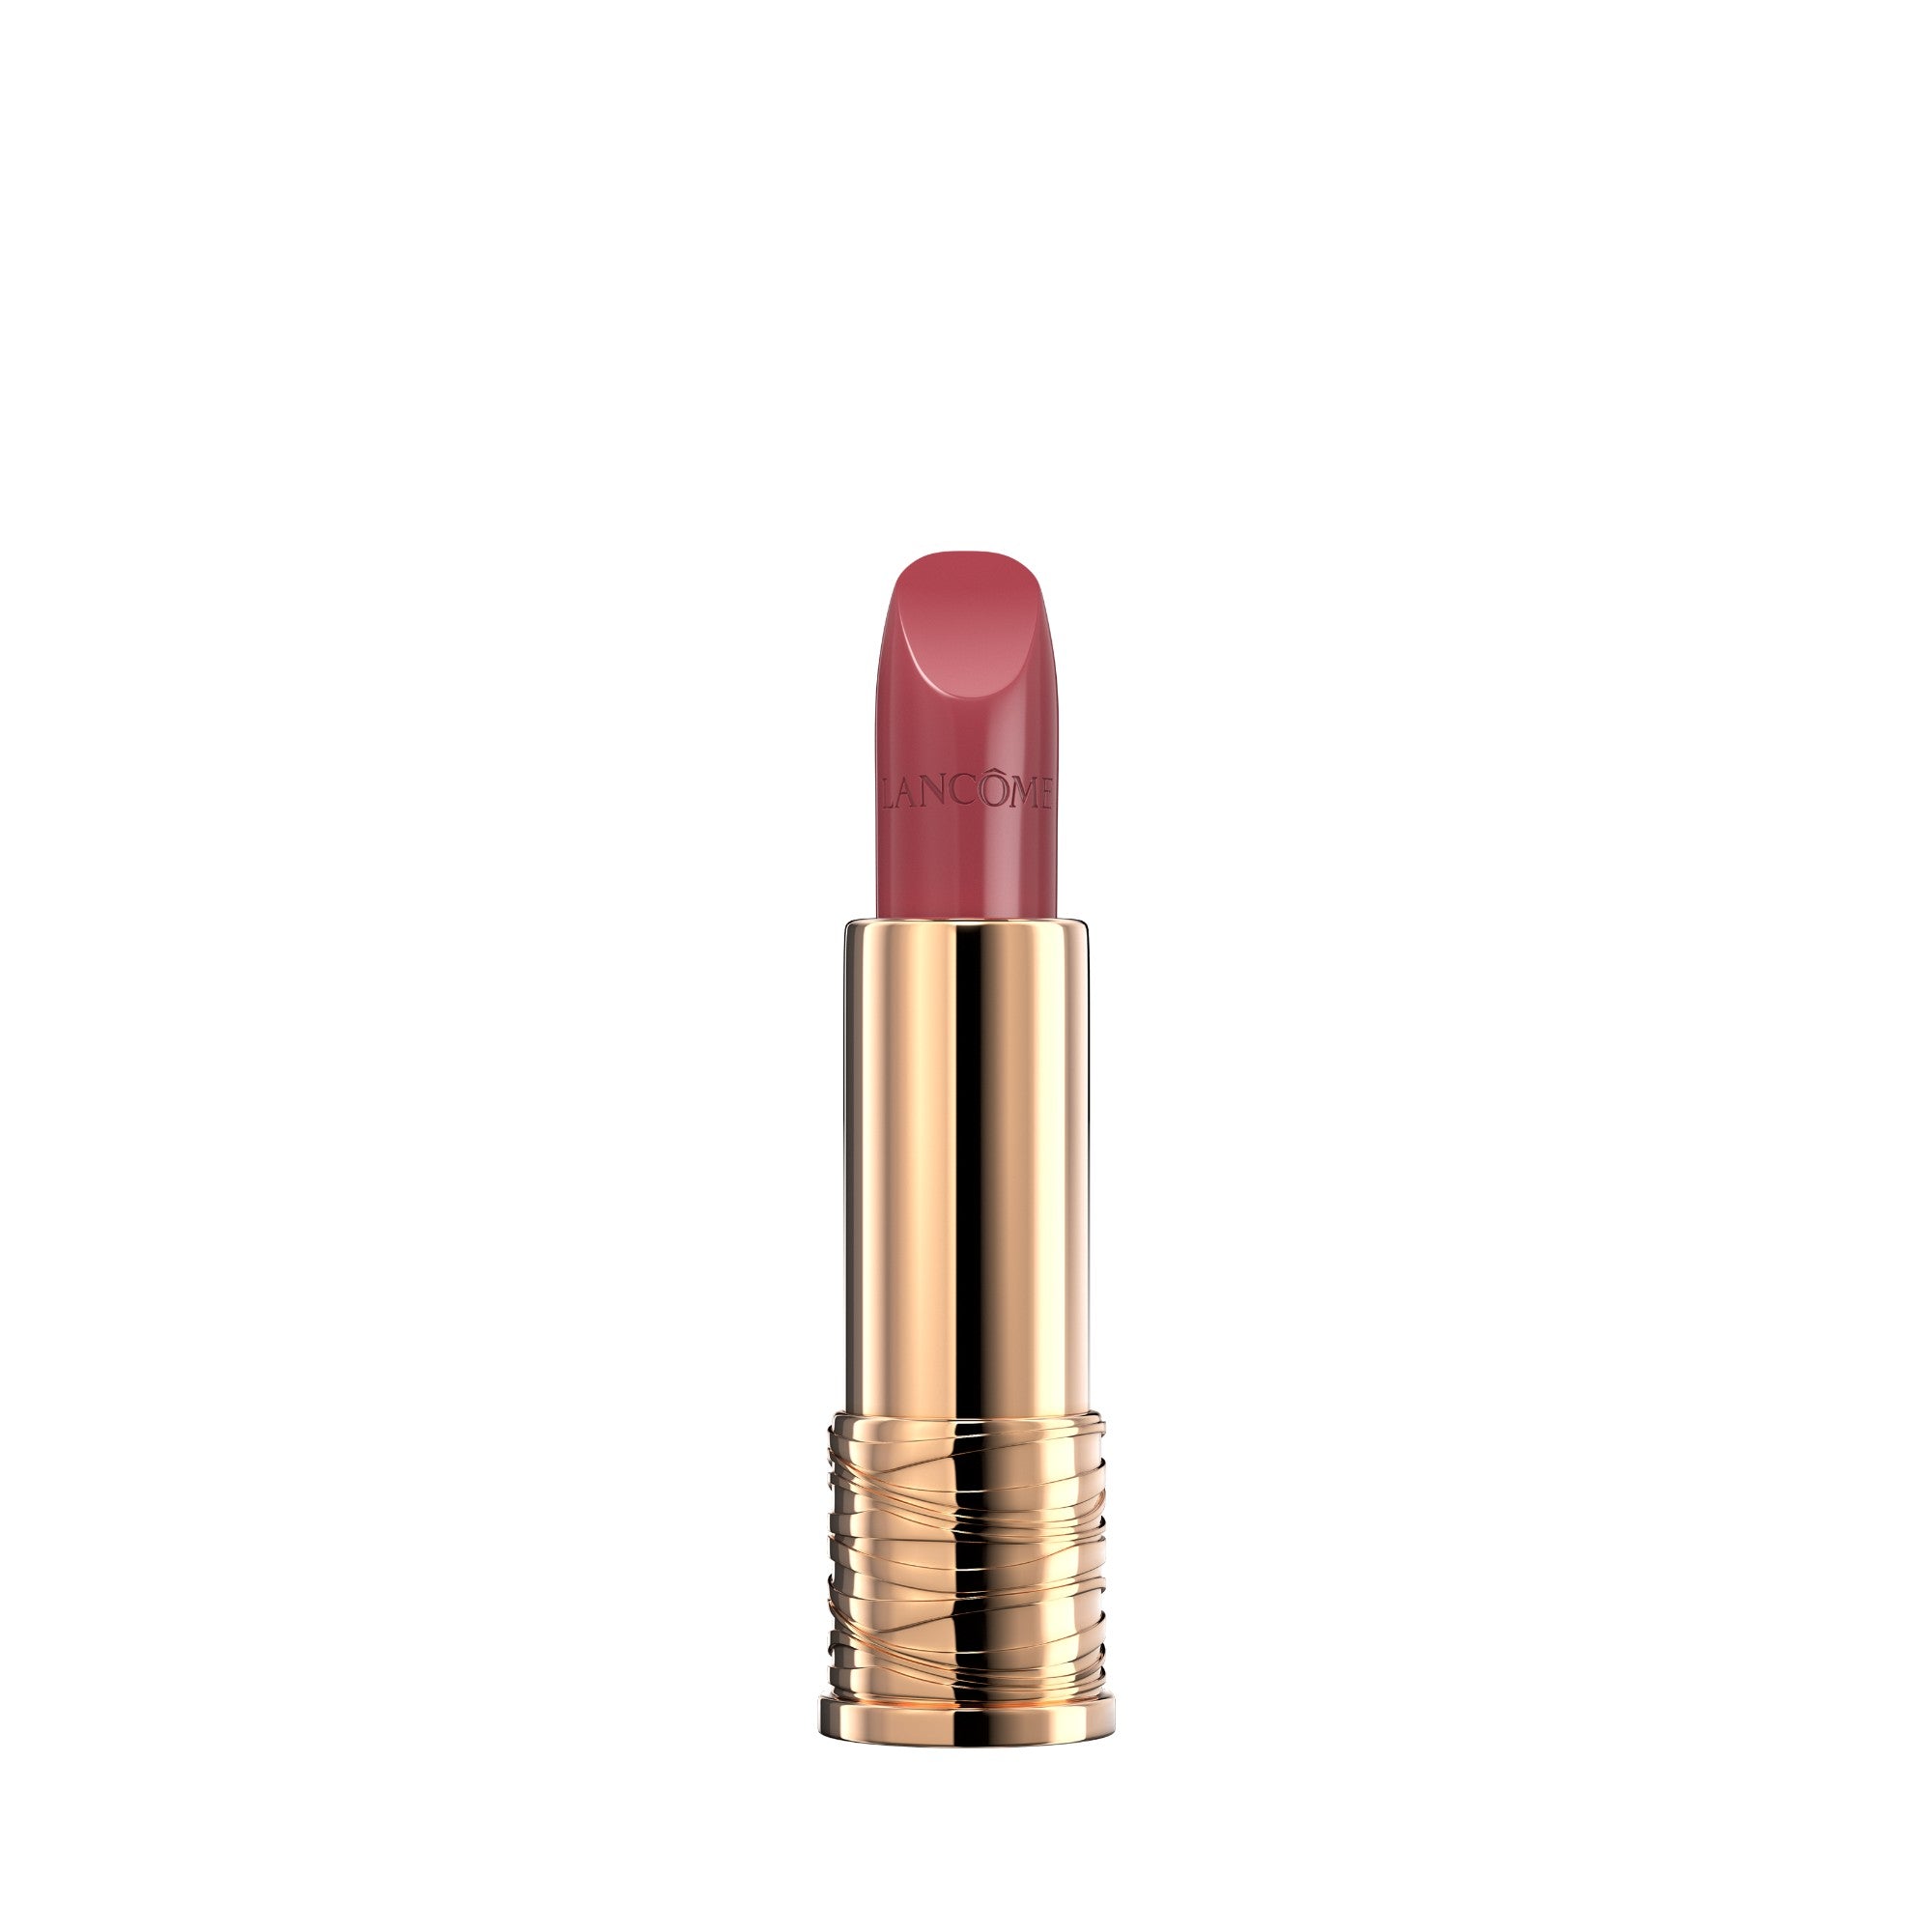 Lancome Absolu Rouge Cream Lipstick One Last Night Only